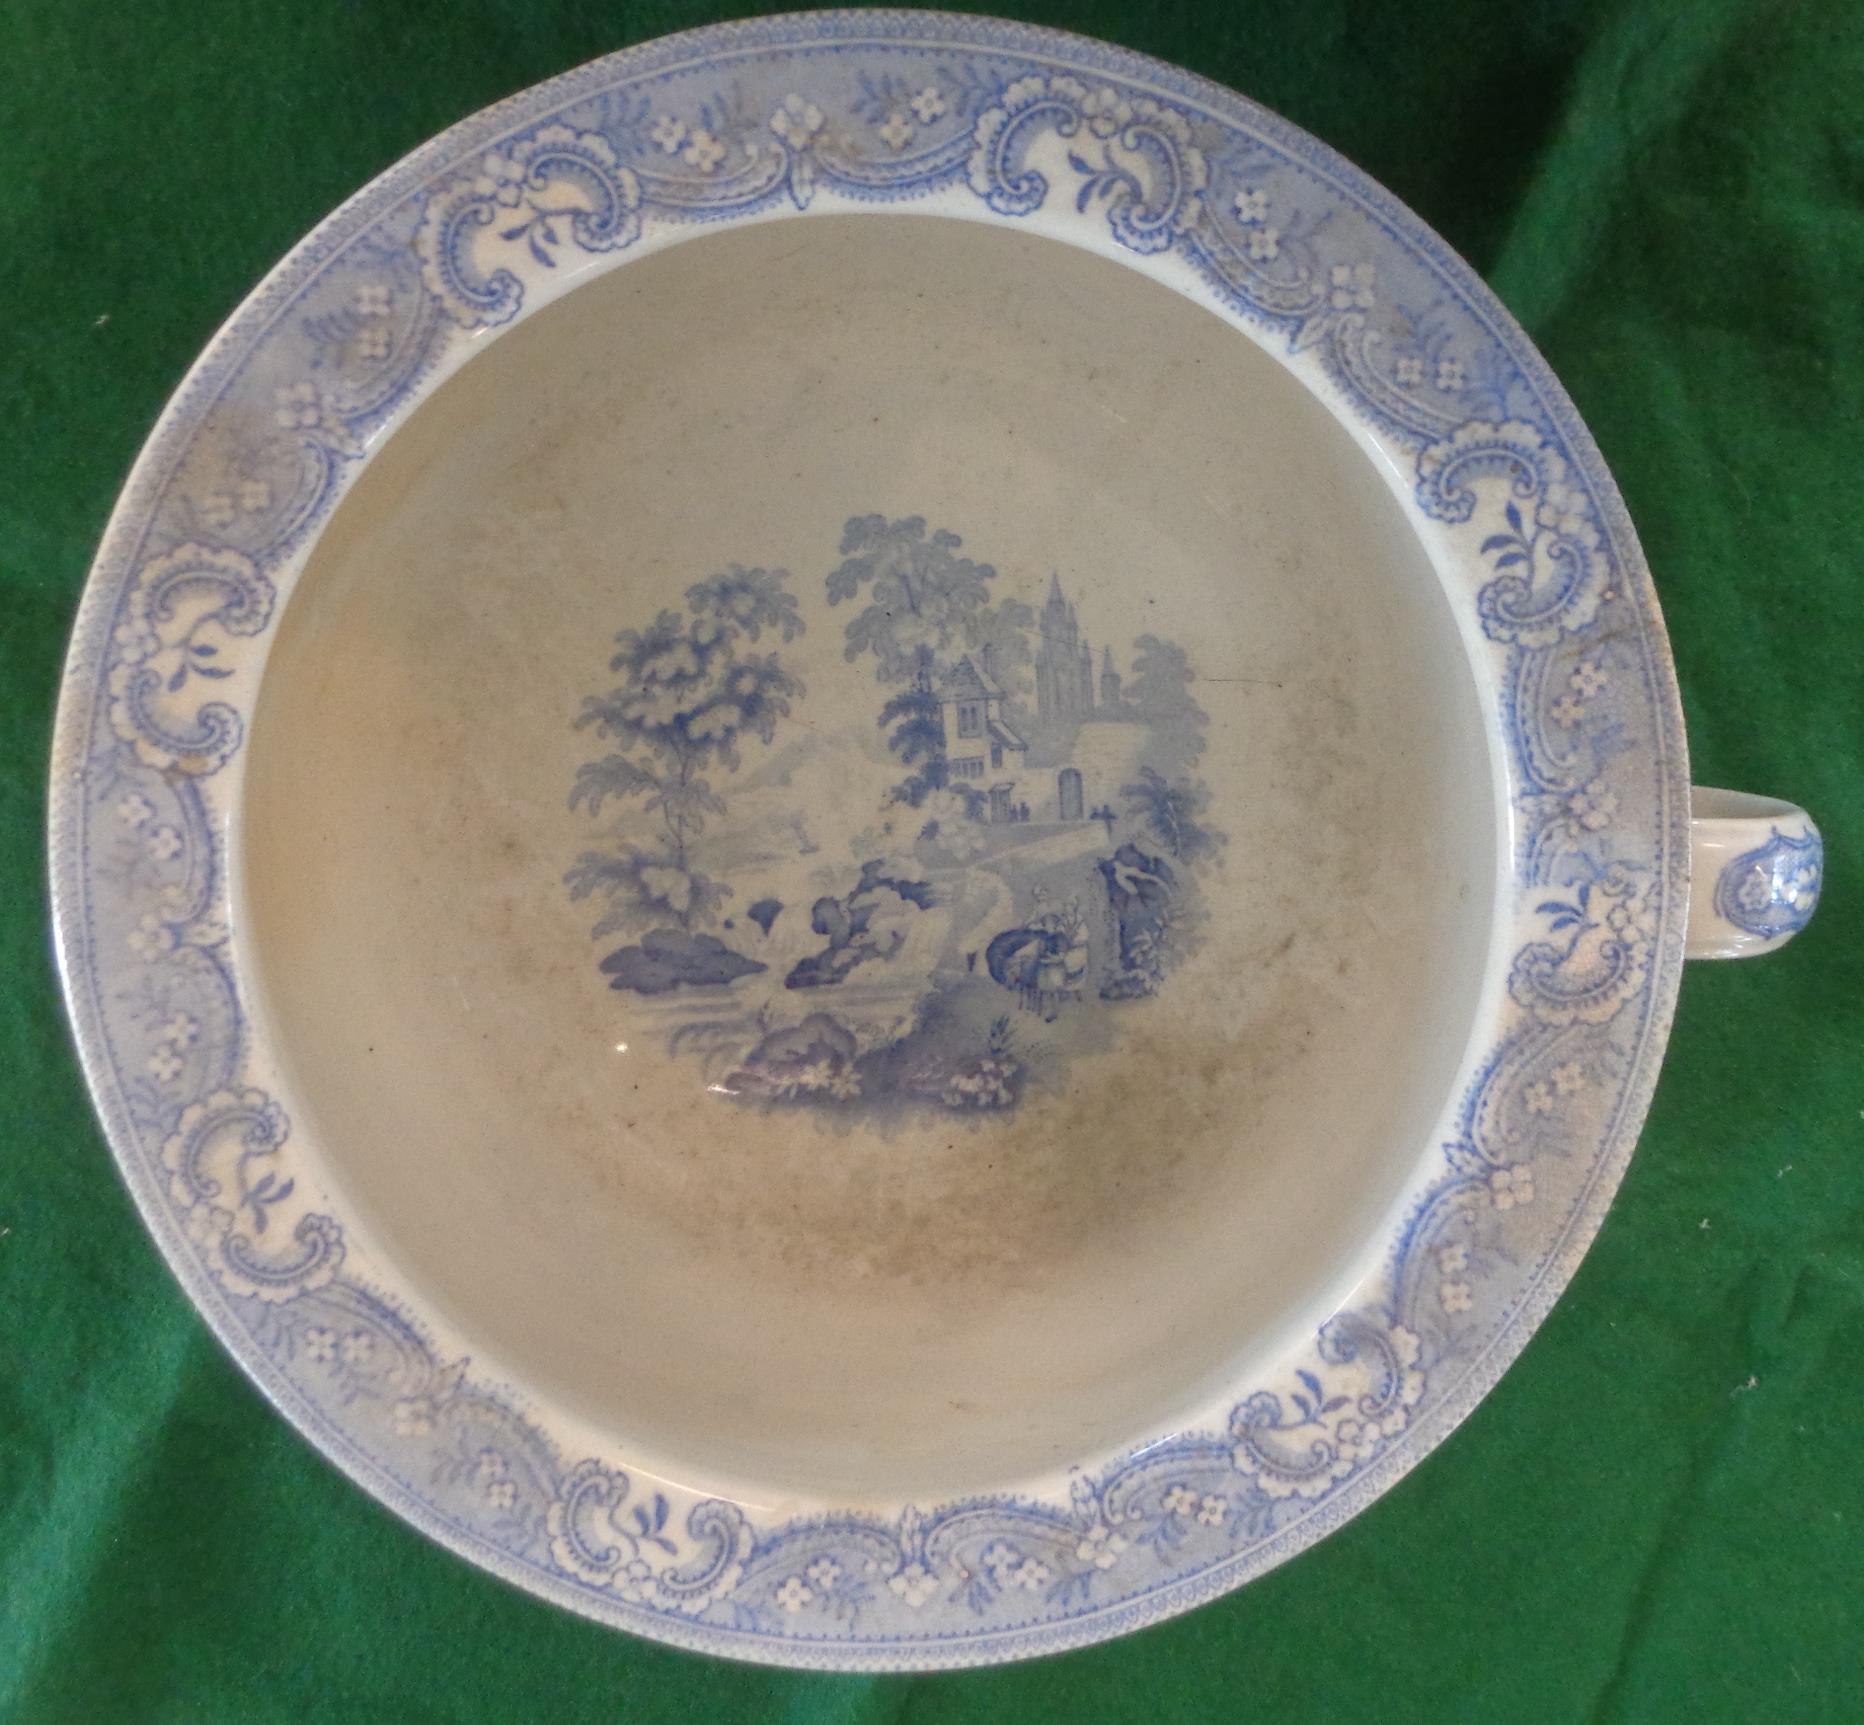 Quantity of enamel saucepans and a 19th c. Davenport blue and white chamber pot - Image 3 of 5